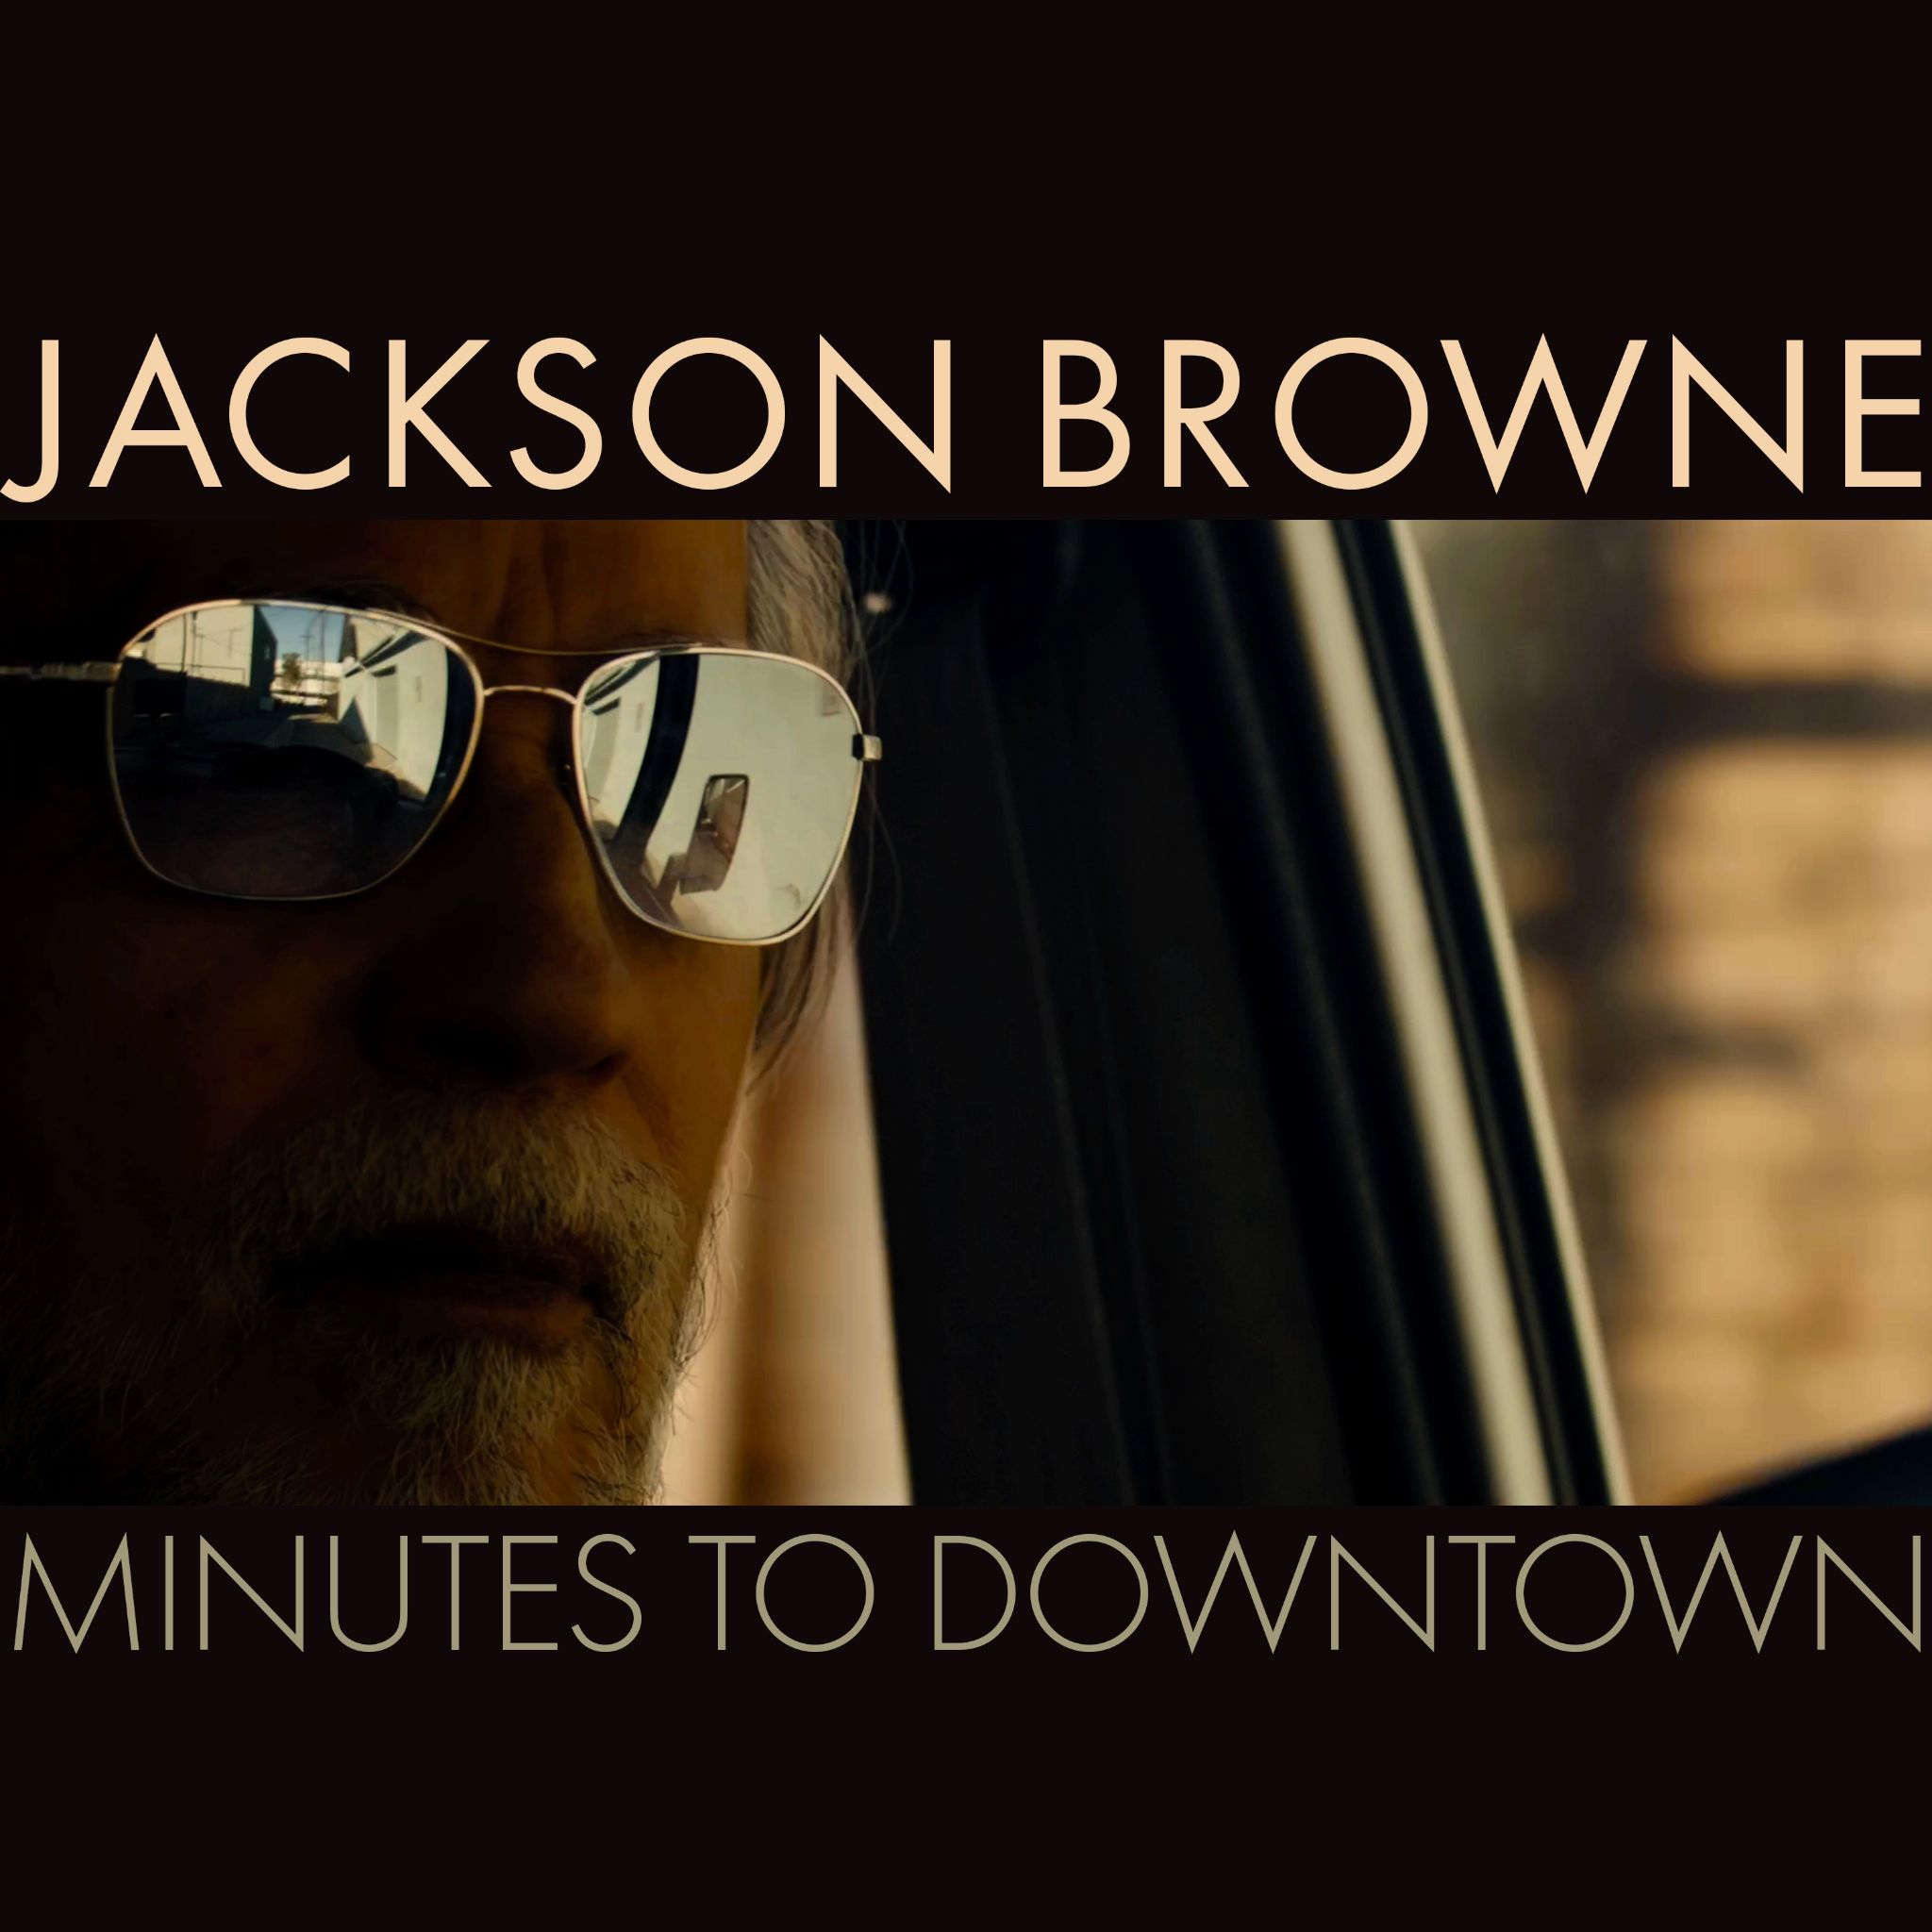 Jackson Browne Shares Music Video For “Minutes To Downtown”